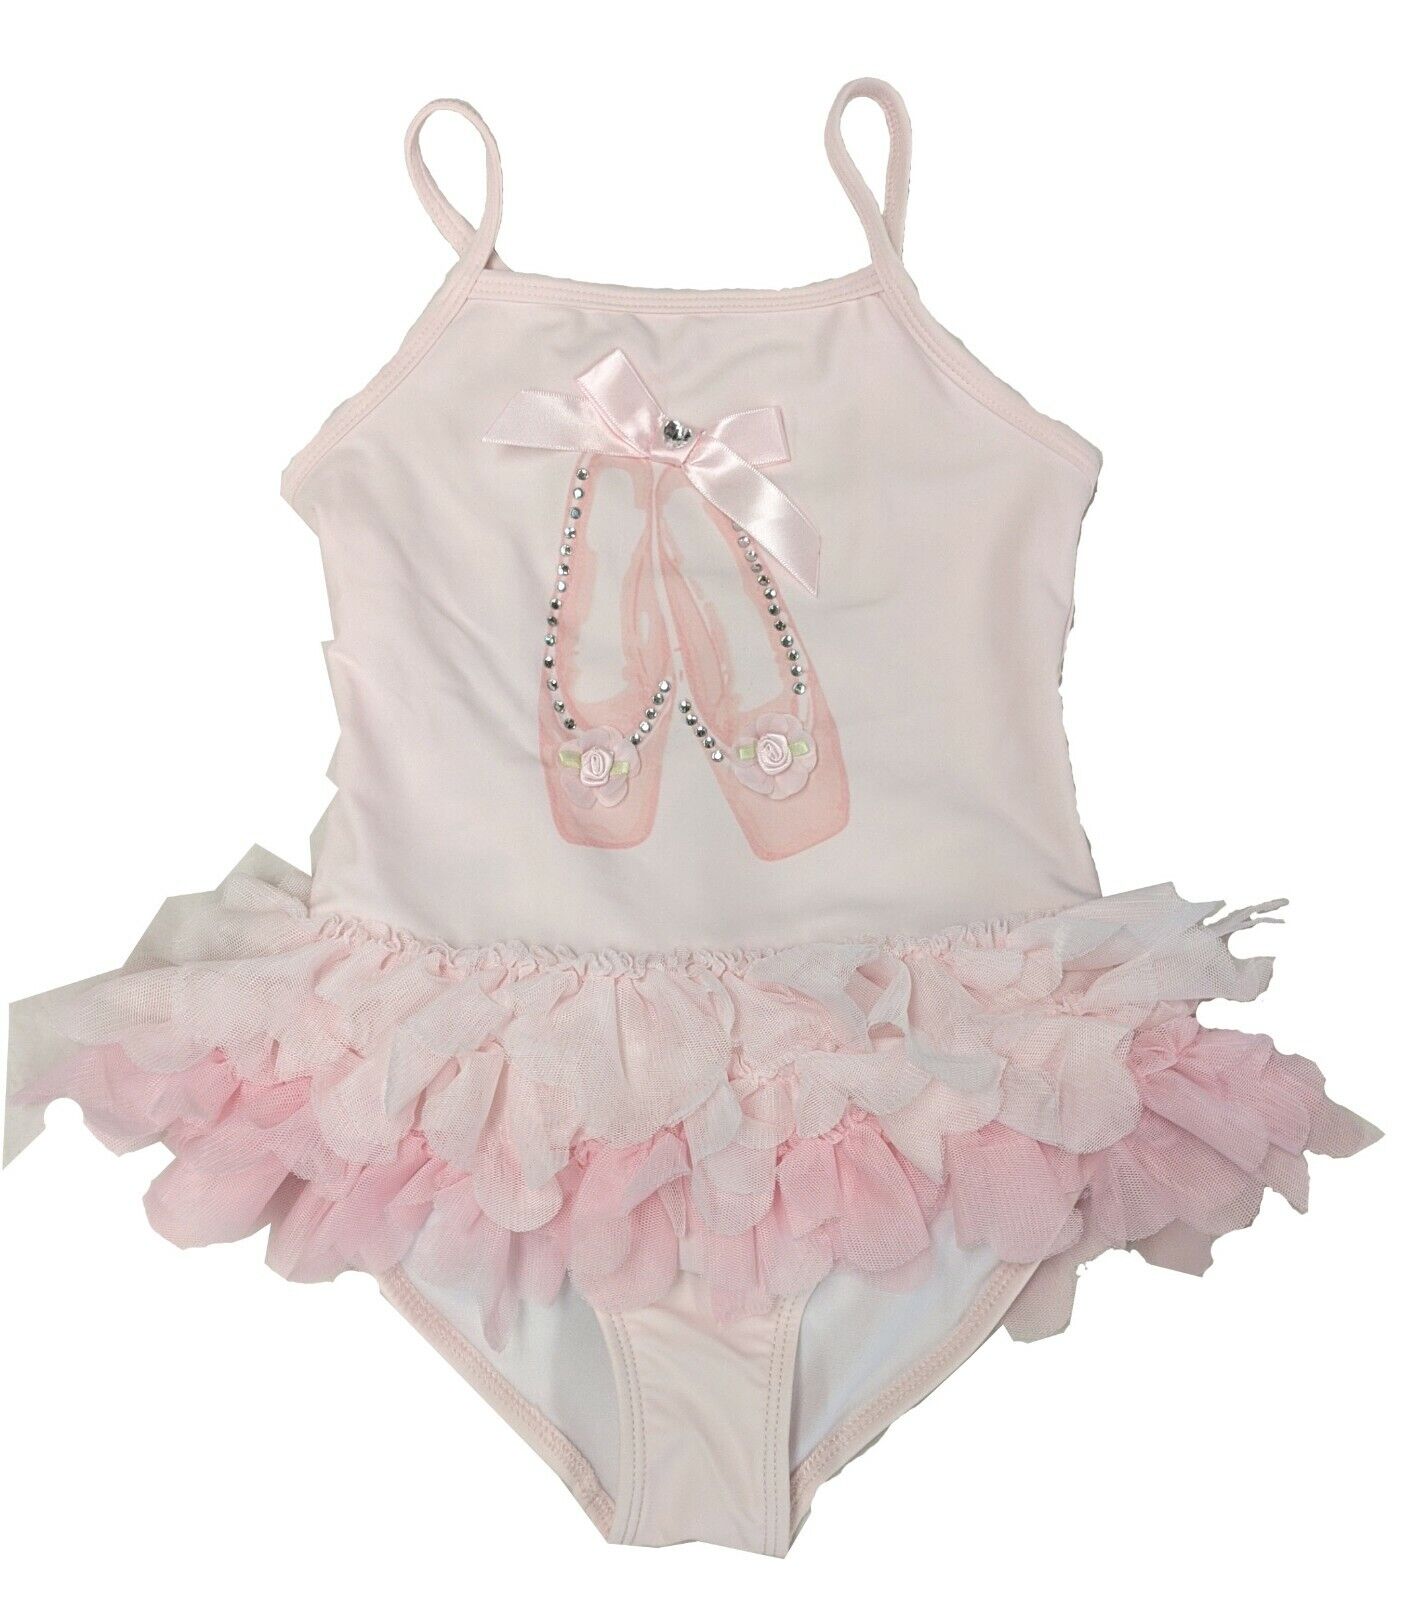 Biscotti Girl's UPF 50 One Piece Swimsuit Pink (Ballet Slippers)